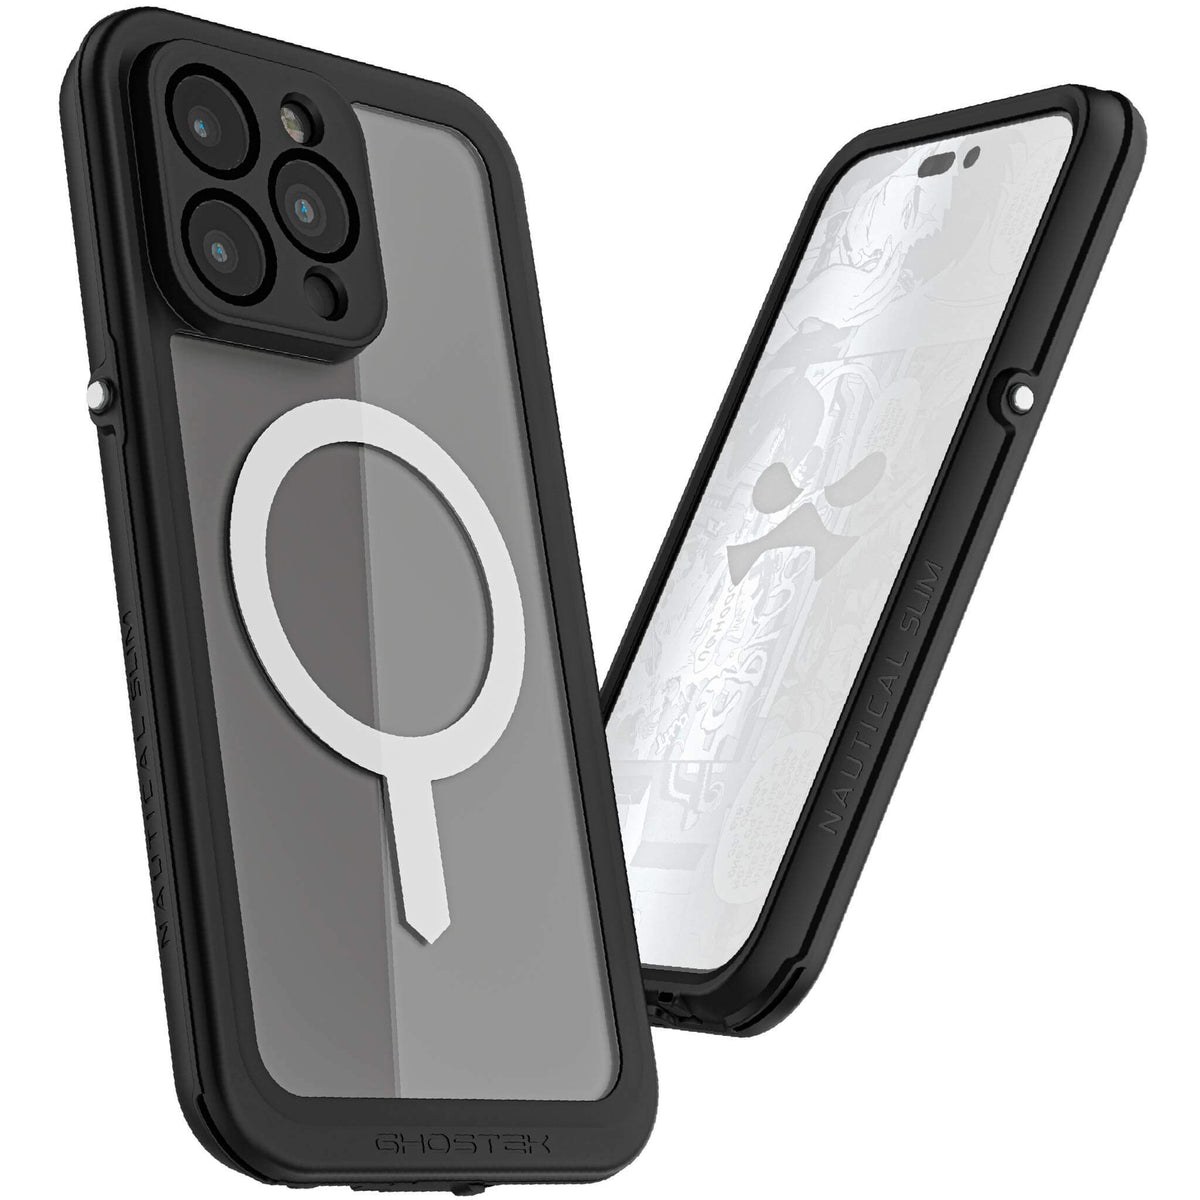 Ghostek Nautical Slim iPhone 14 Pro Max Case Waterproof with Screen Protector, MagSafe Magnet, and Camera Lens Cover Rugged Full